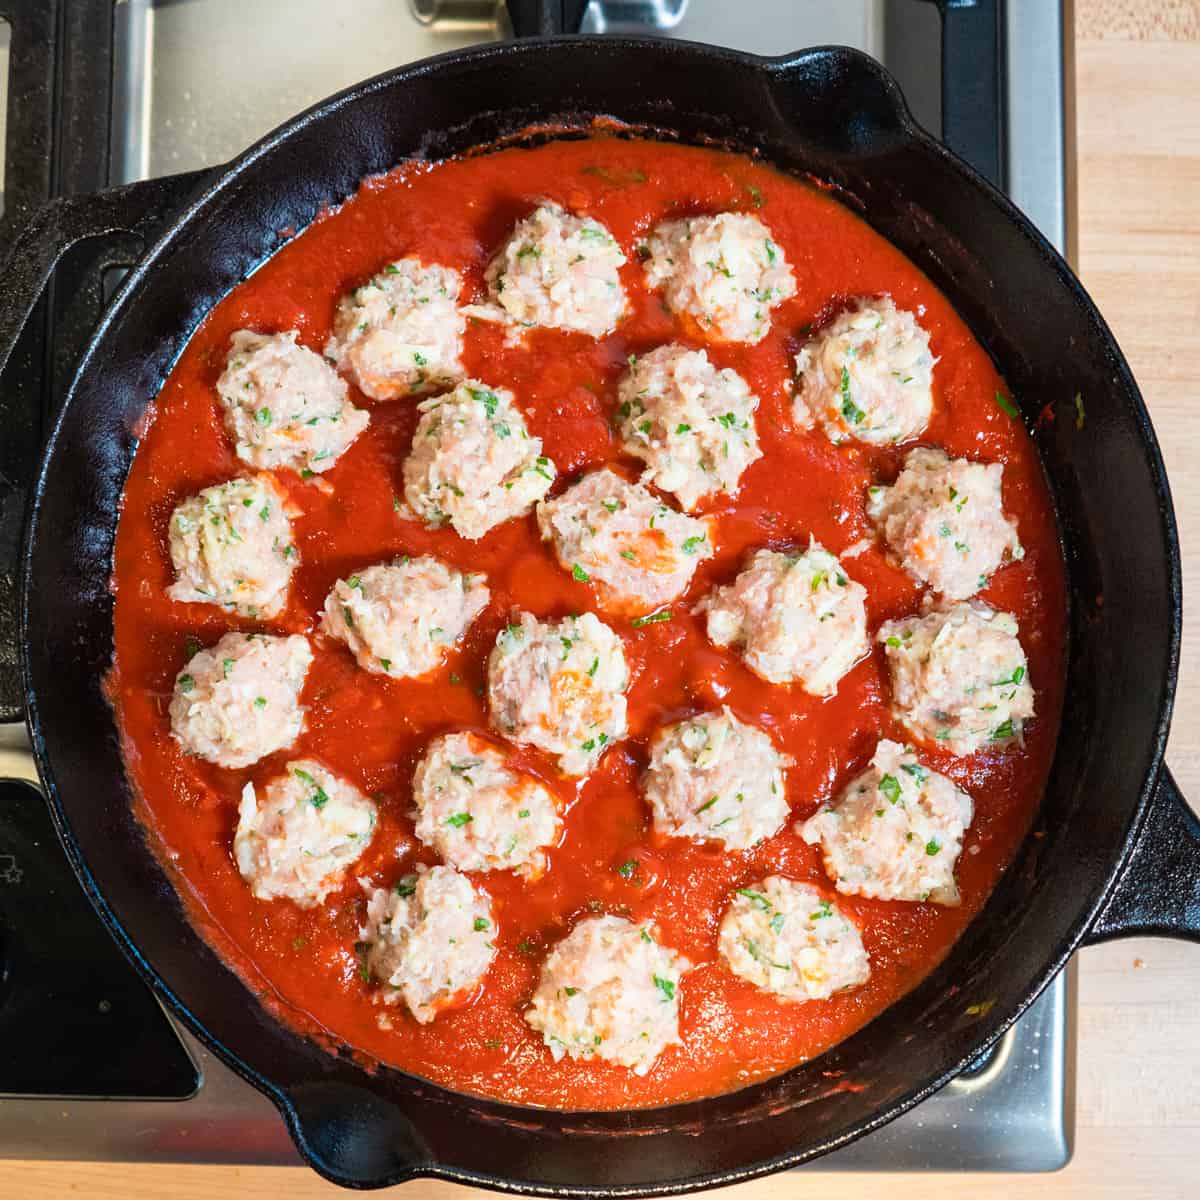 meatballs are added to the sauce in the skillet